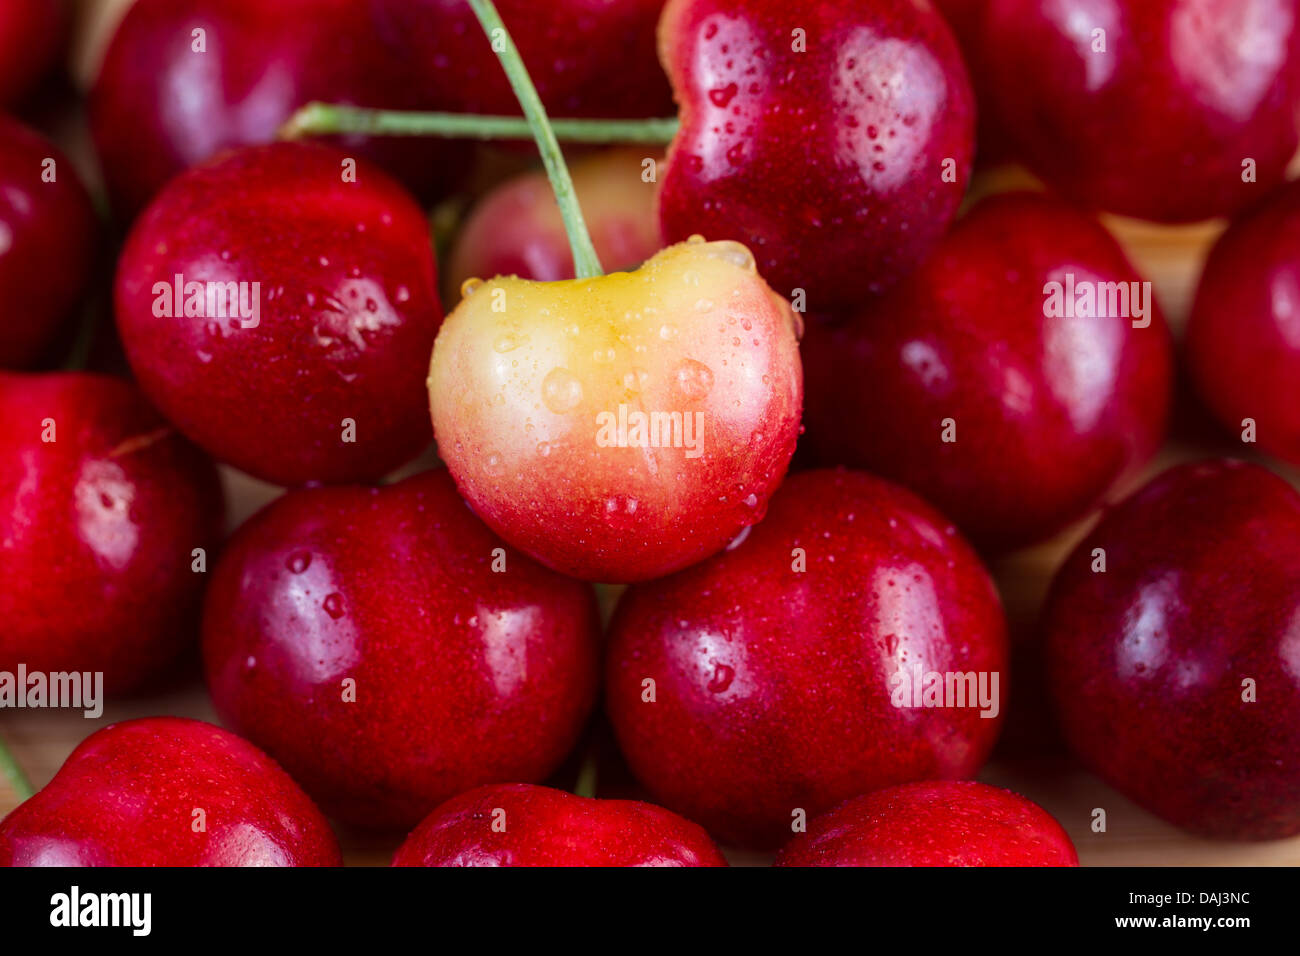 Closeup horizontal photo of a single Yellow Rainier cherry, with water drops, in pile of red cherries in background Stock Photo